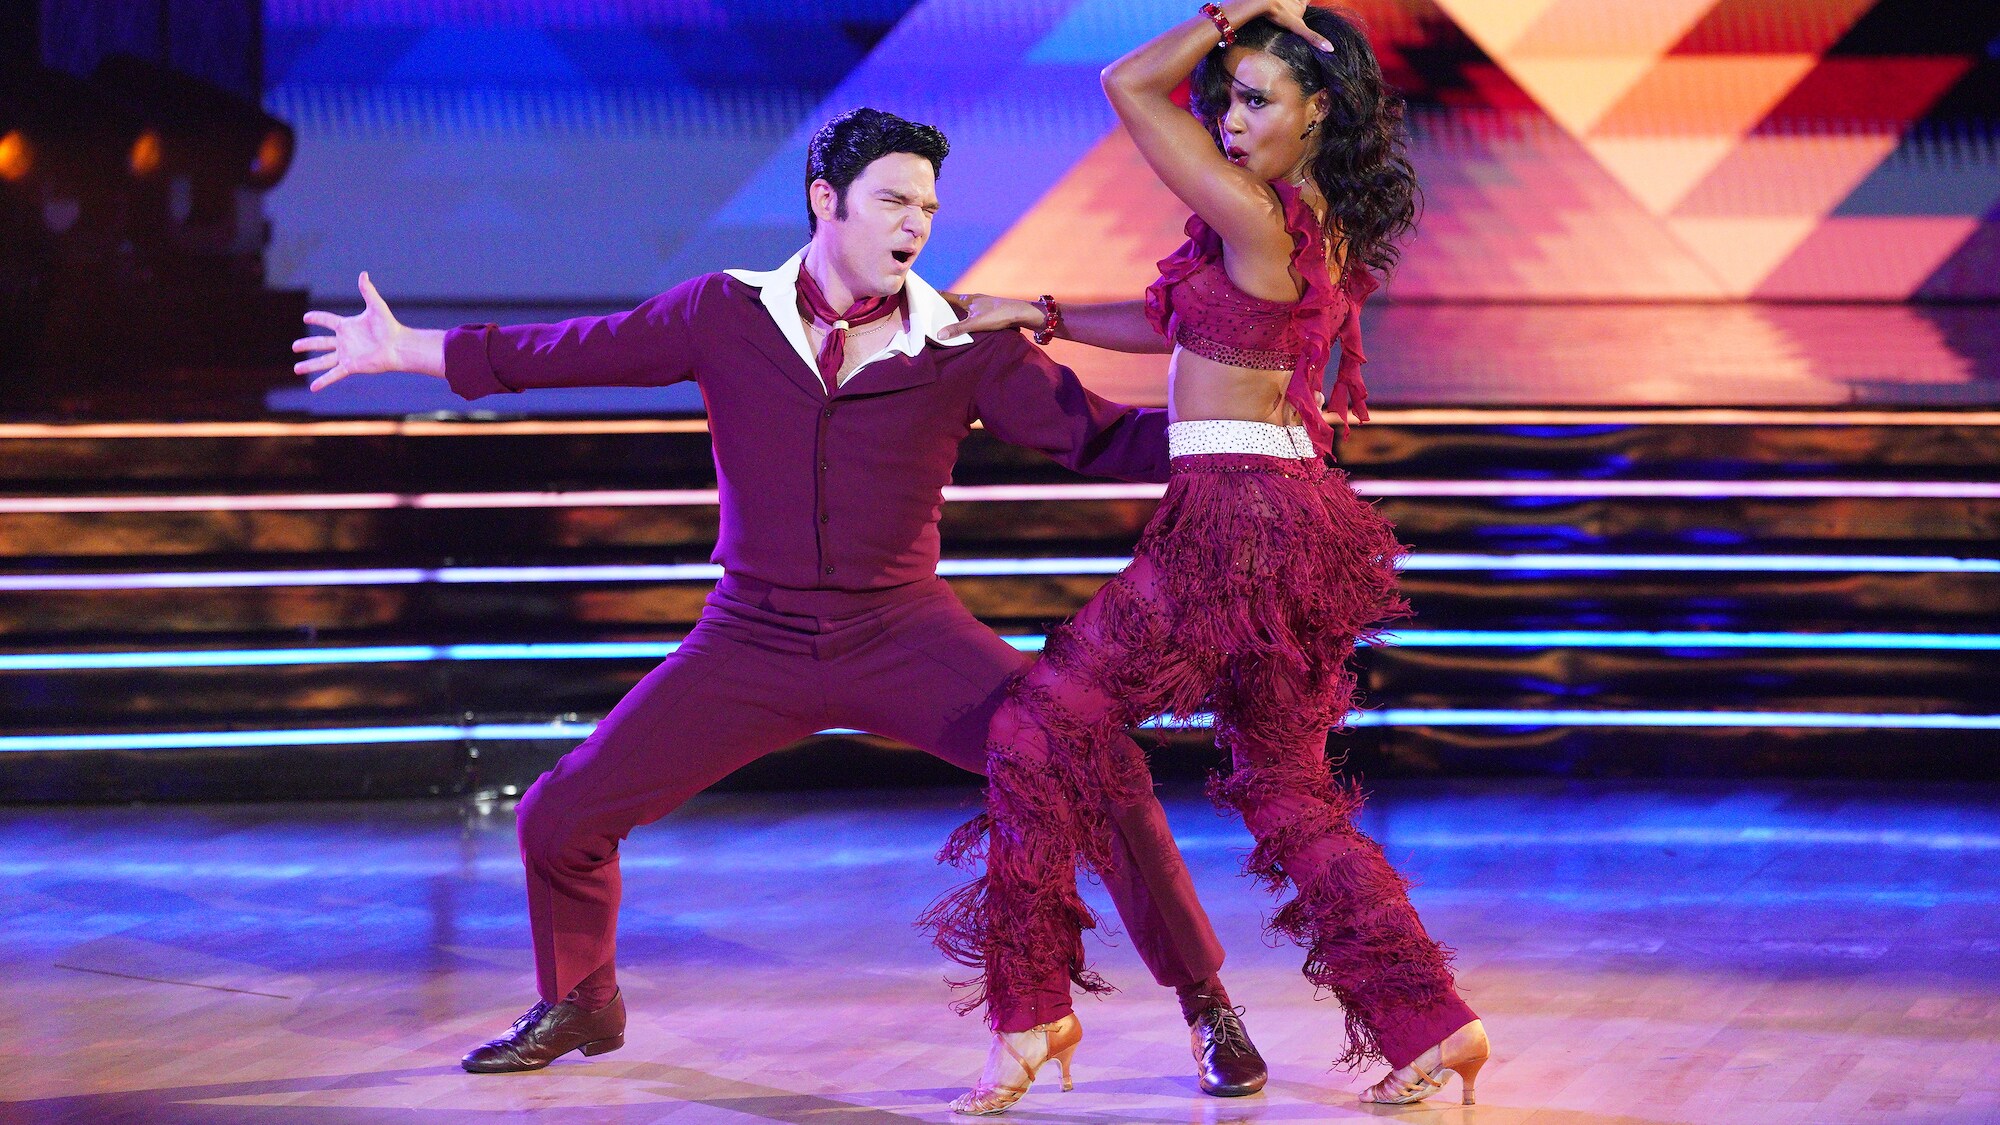 DANCING WITH THE STARS - “Elvis Night” –  The 15 remaining couples “Can’t Help Falling in Love” with Elvis this week as they take on all-new dance styles to music by The King of Rock ‘n’ Roll. Week two of the mirorrball competition will stream live MONDAY, SEPT. 26 (8:00pm ET / 5:00pm PT), on Disney+. (ABC/Christopher Willard) DANIEL DURANT, BRITT STEWART